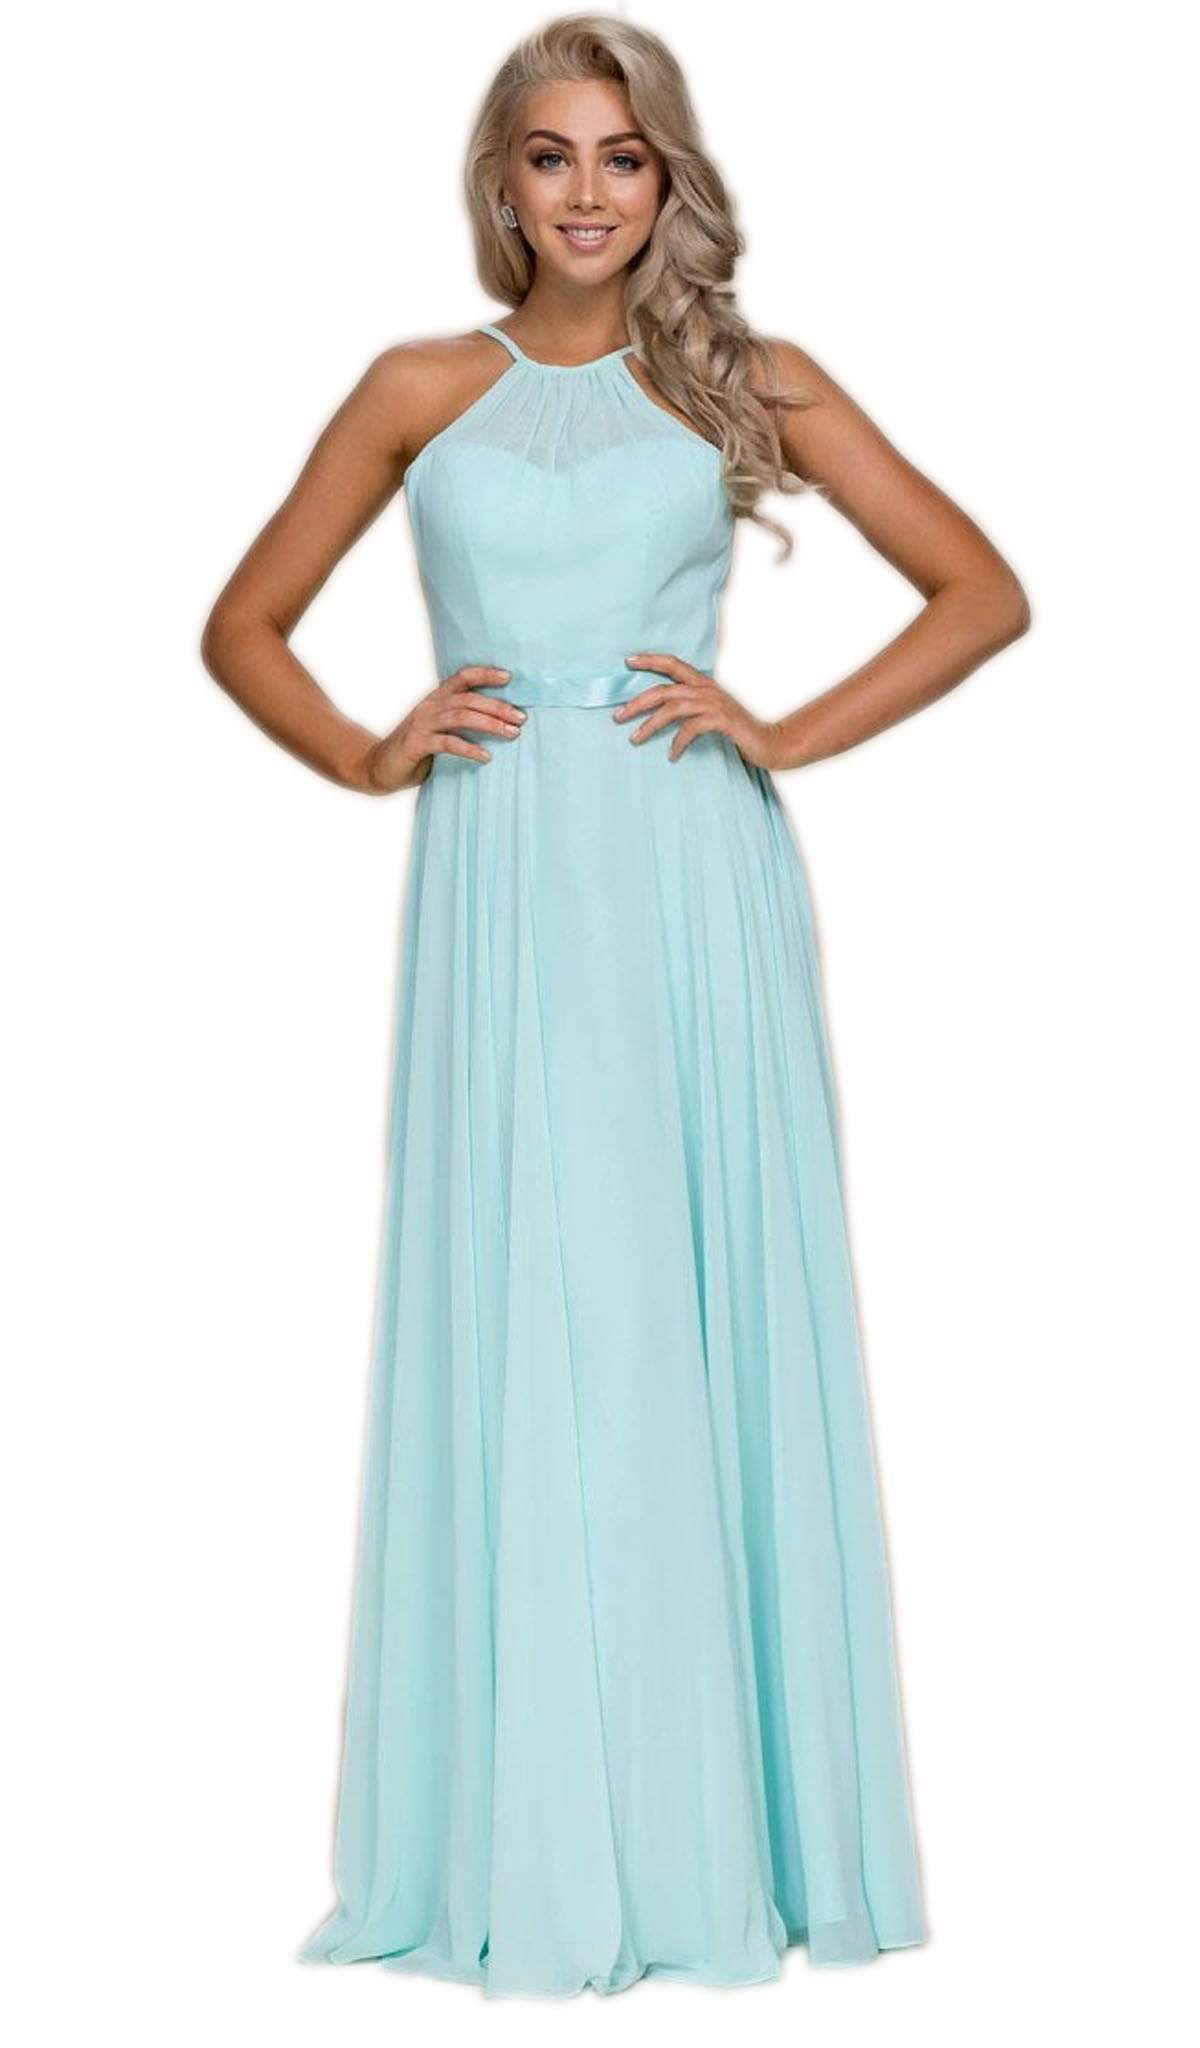 Nox Anabel - Y102 Halter Strap Lace Up Chiffon Evening Gown
